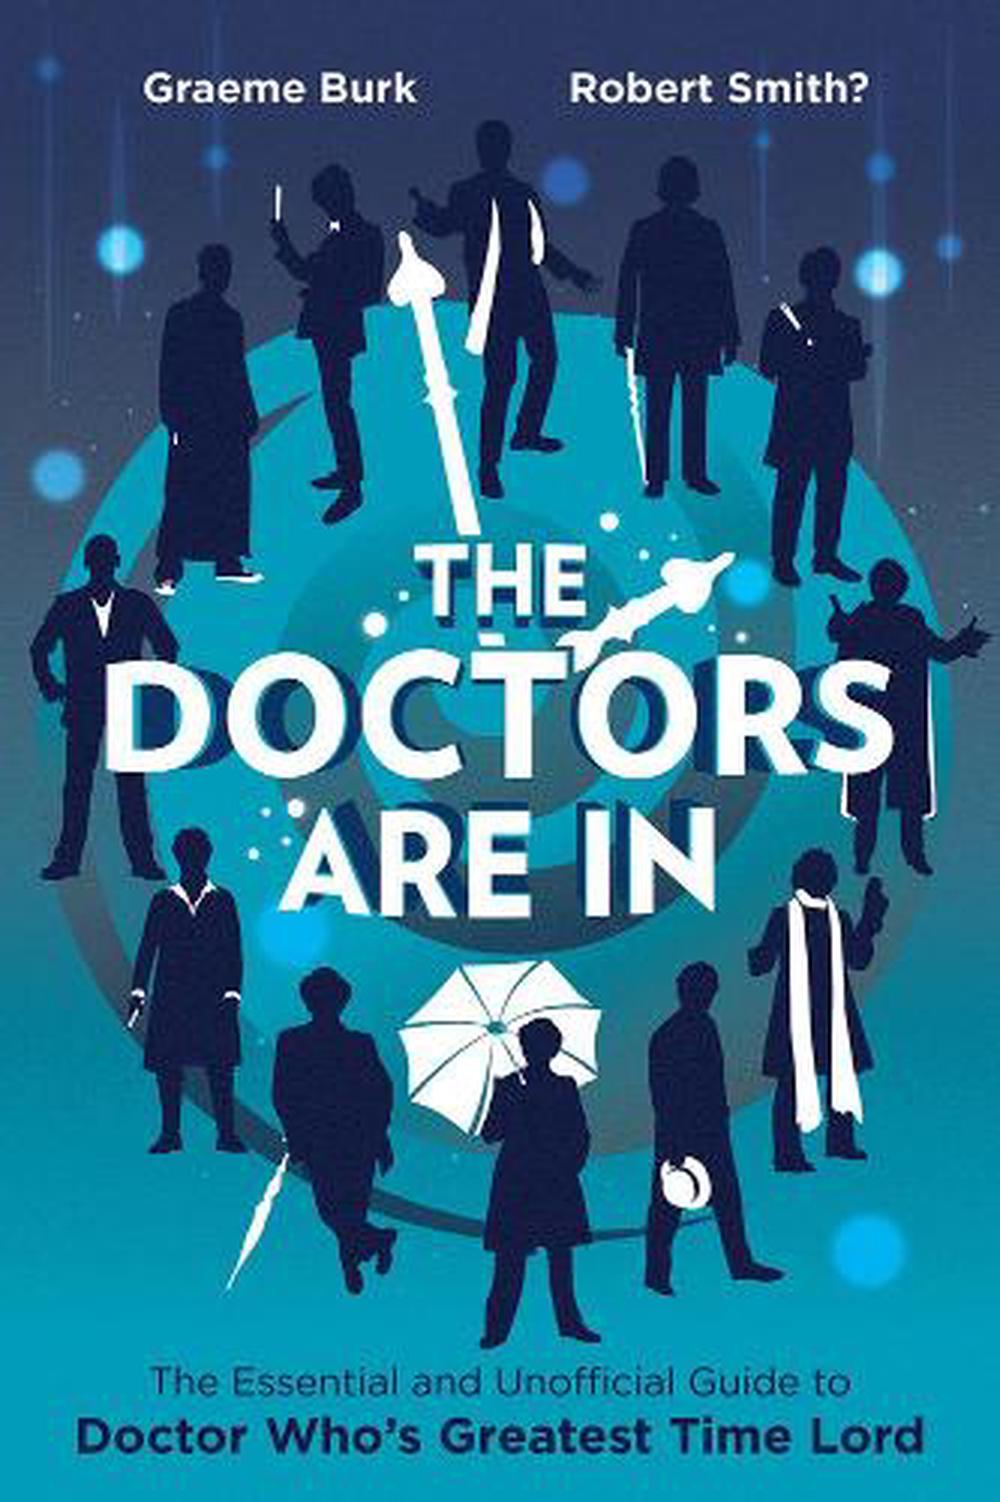 Doctor Who by James Goss